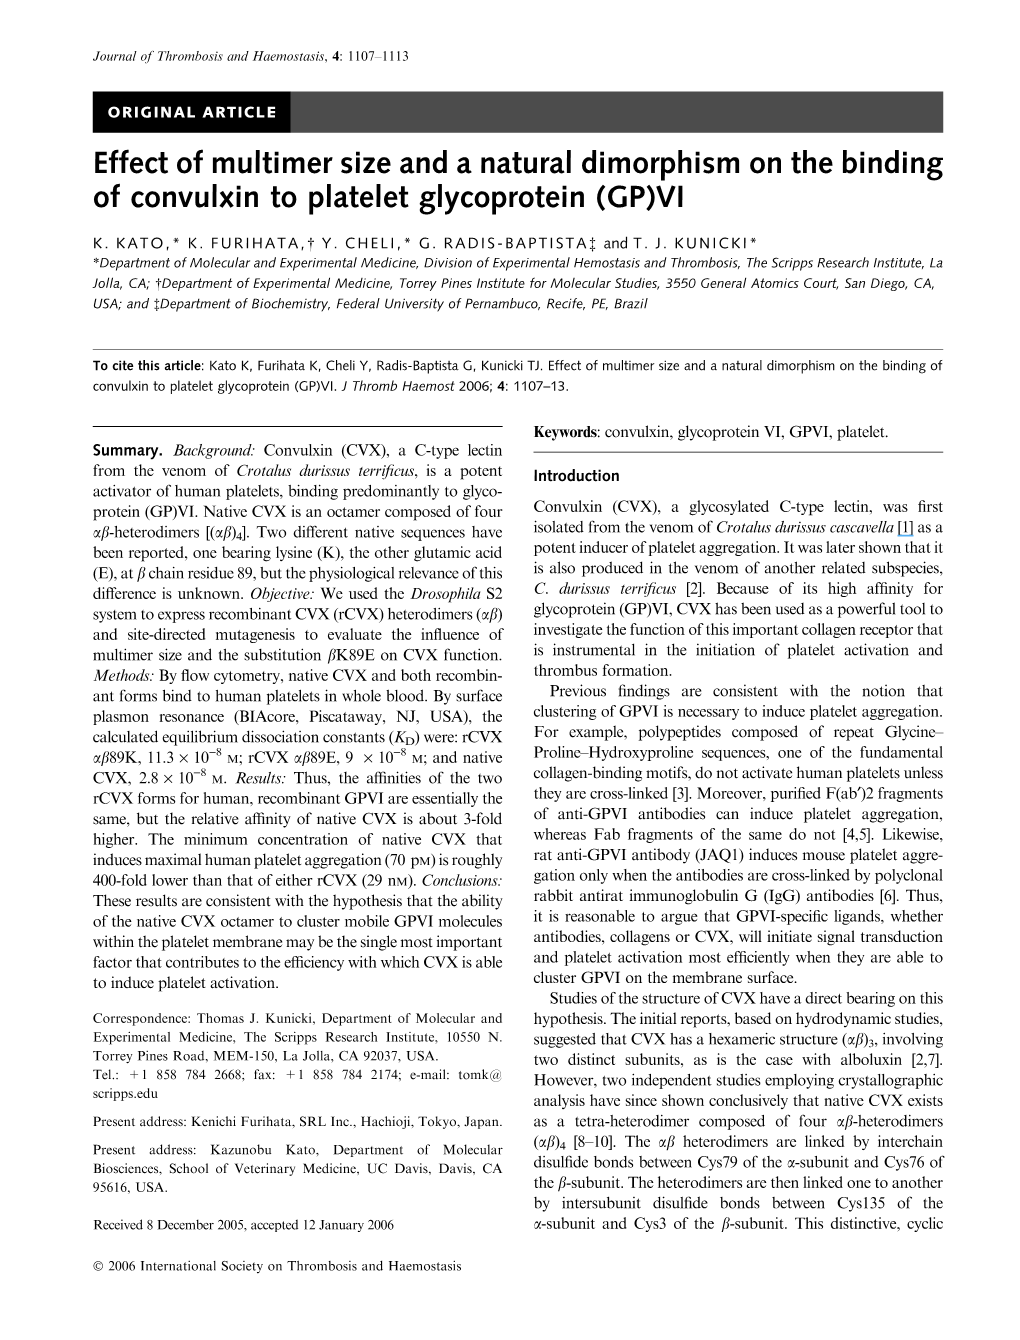 Effect of Multimer Size and a Natural Dimorphism on the Binding of Convulxin to Platelet Glycoprotein (GP)VI